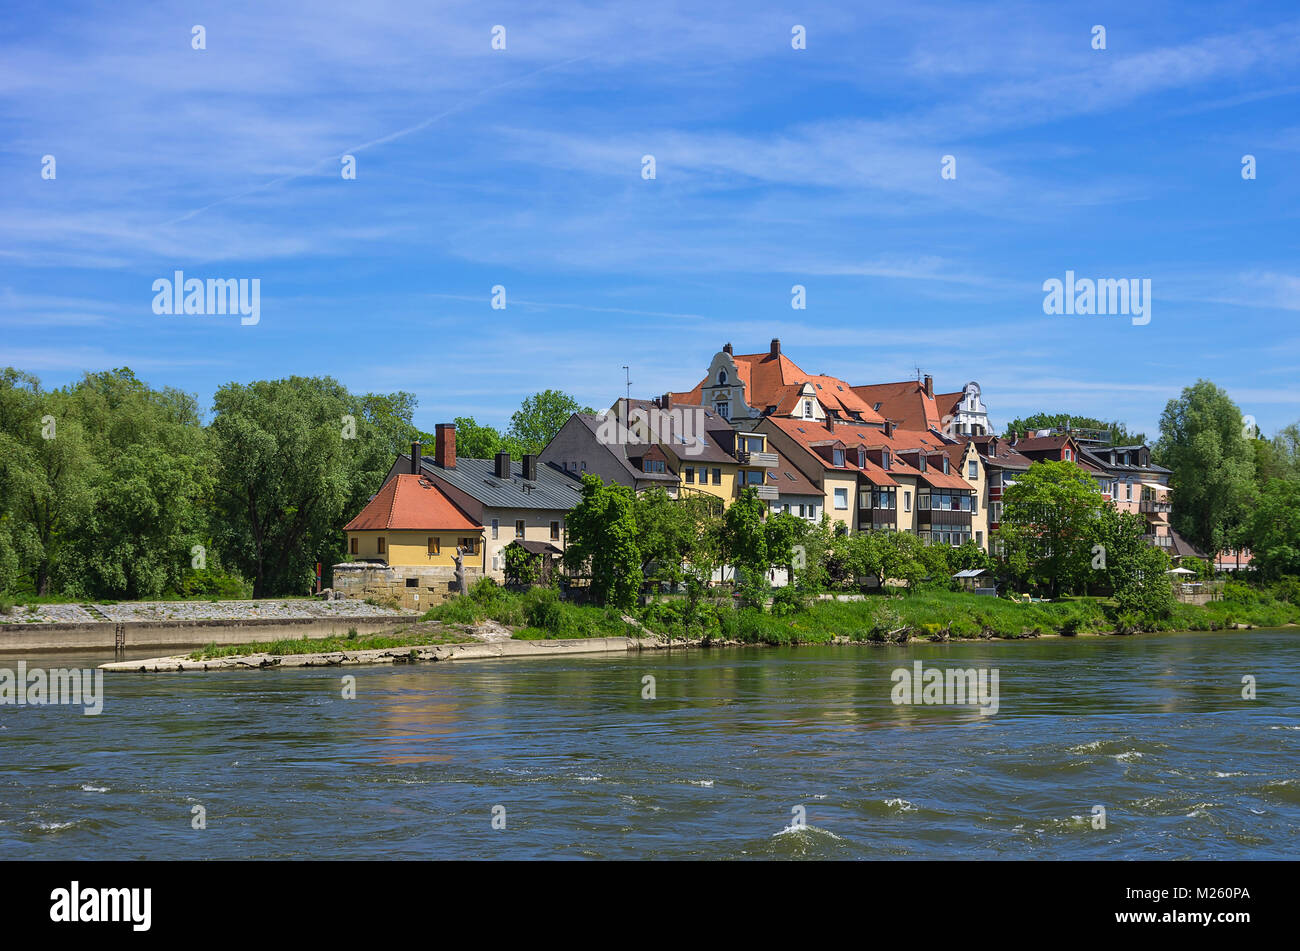 View of the Jahninsel Island in the Danube River by Regensburg, Bavaria, Germany. Stock Photo